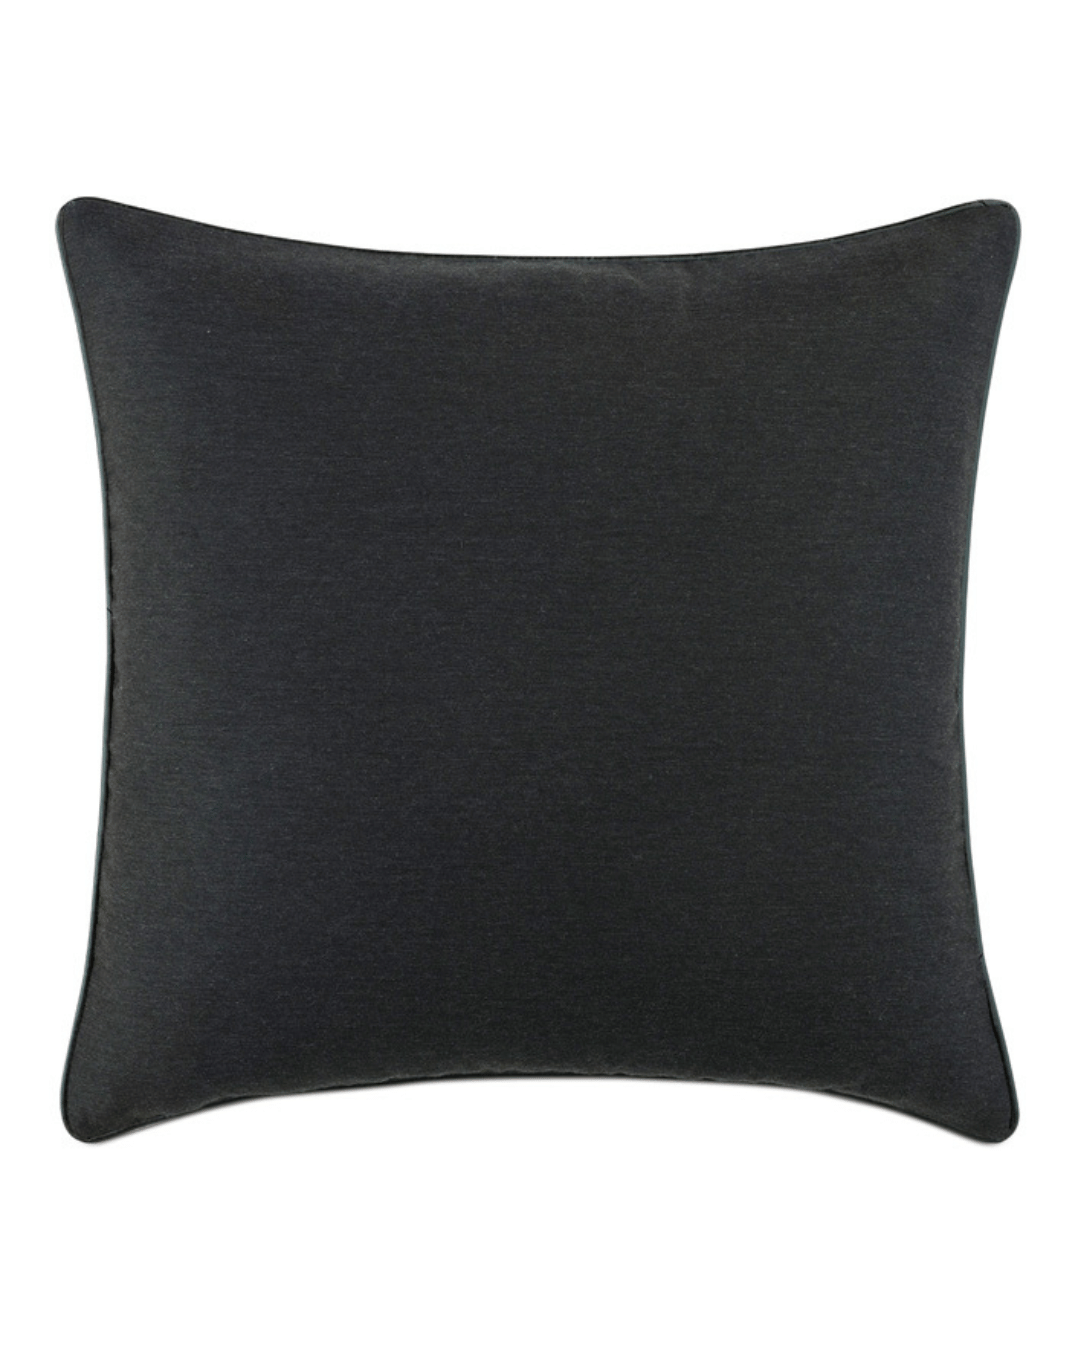 Bungalow-style Eastern Accents Ban Solid Black Pillow with slightly curved edges on a white background.